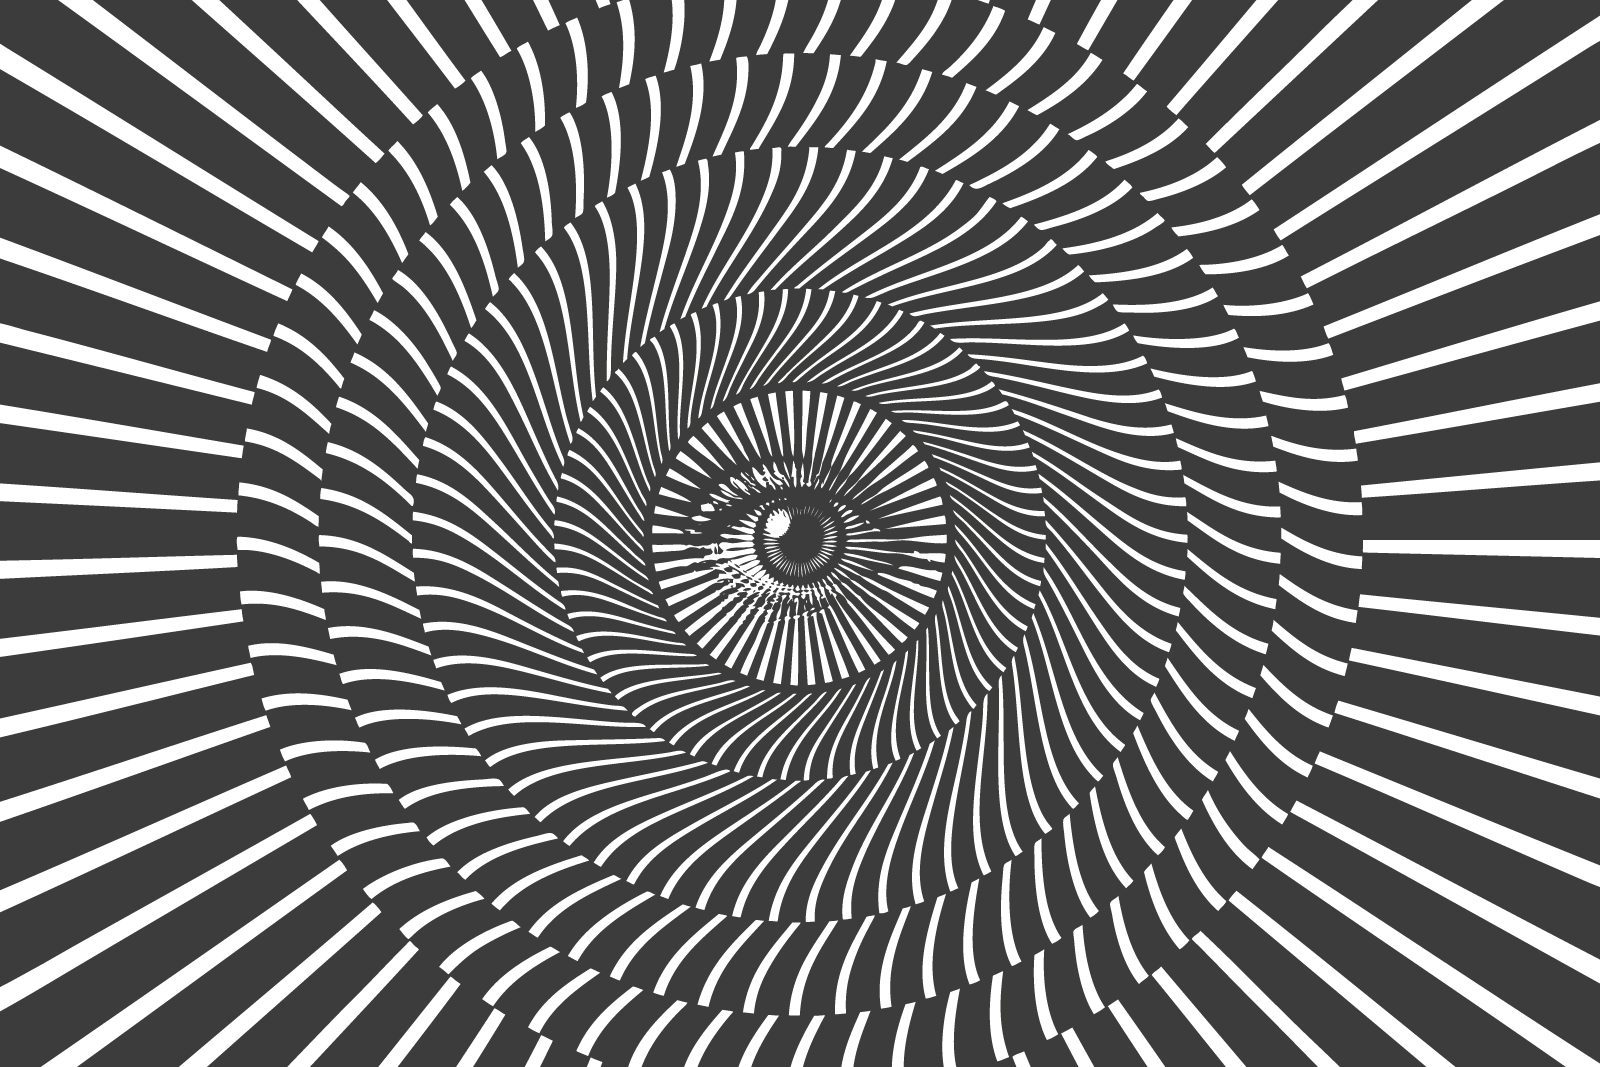 An optical illusion featuring a black and white eye challenges the 5 myths of content design agencies.